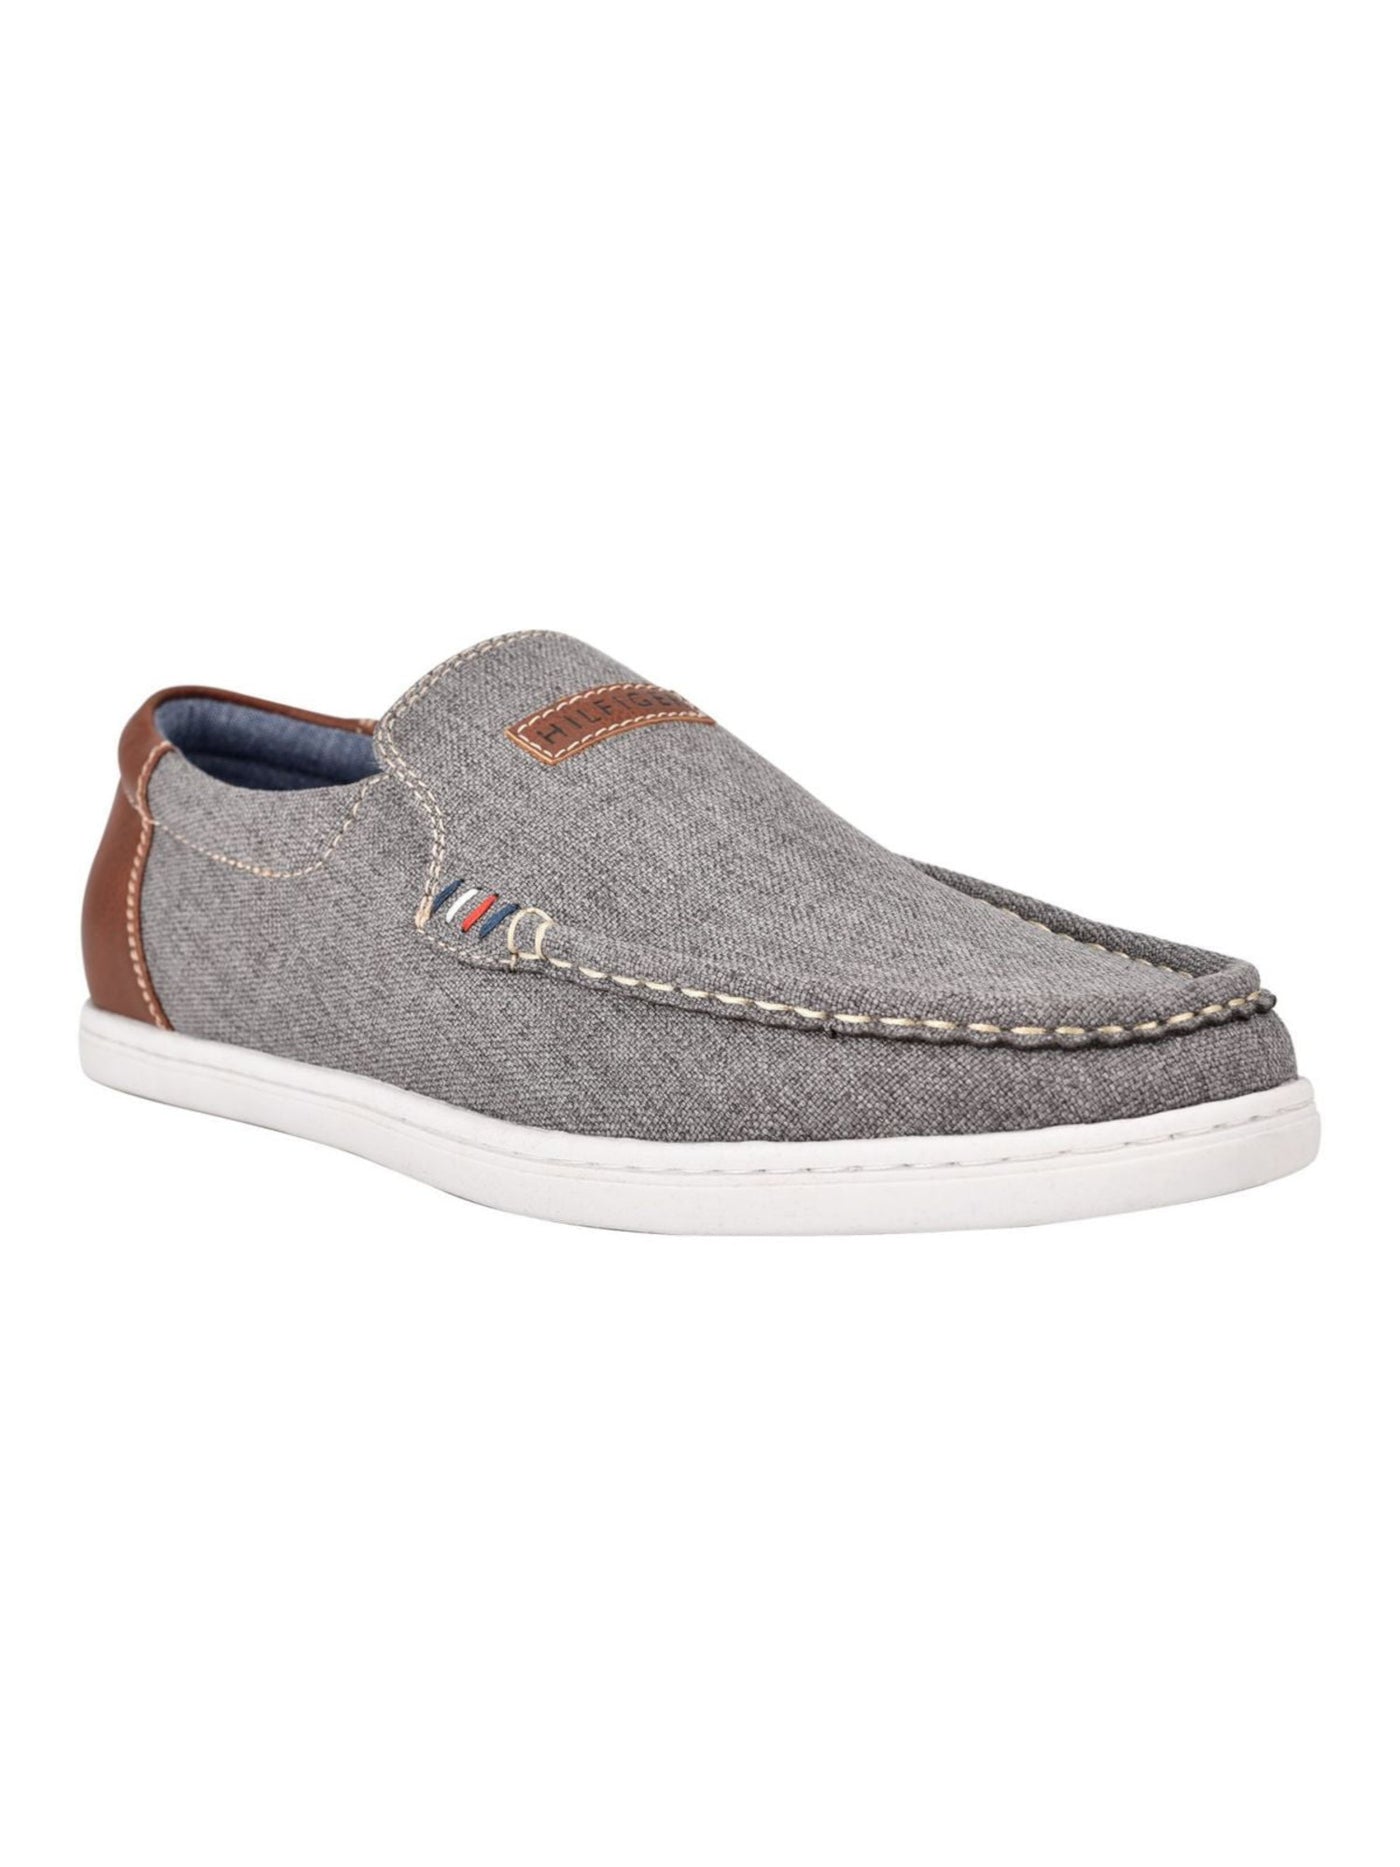 TOMMY HILFIGER Mens Gray Linen Cushioned Stretch Carlid Round Toe Slip On Sneakers Shoes 13